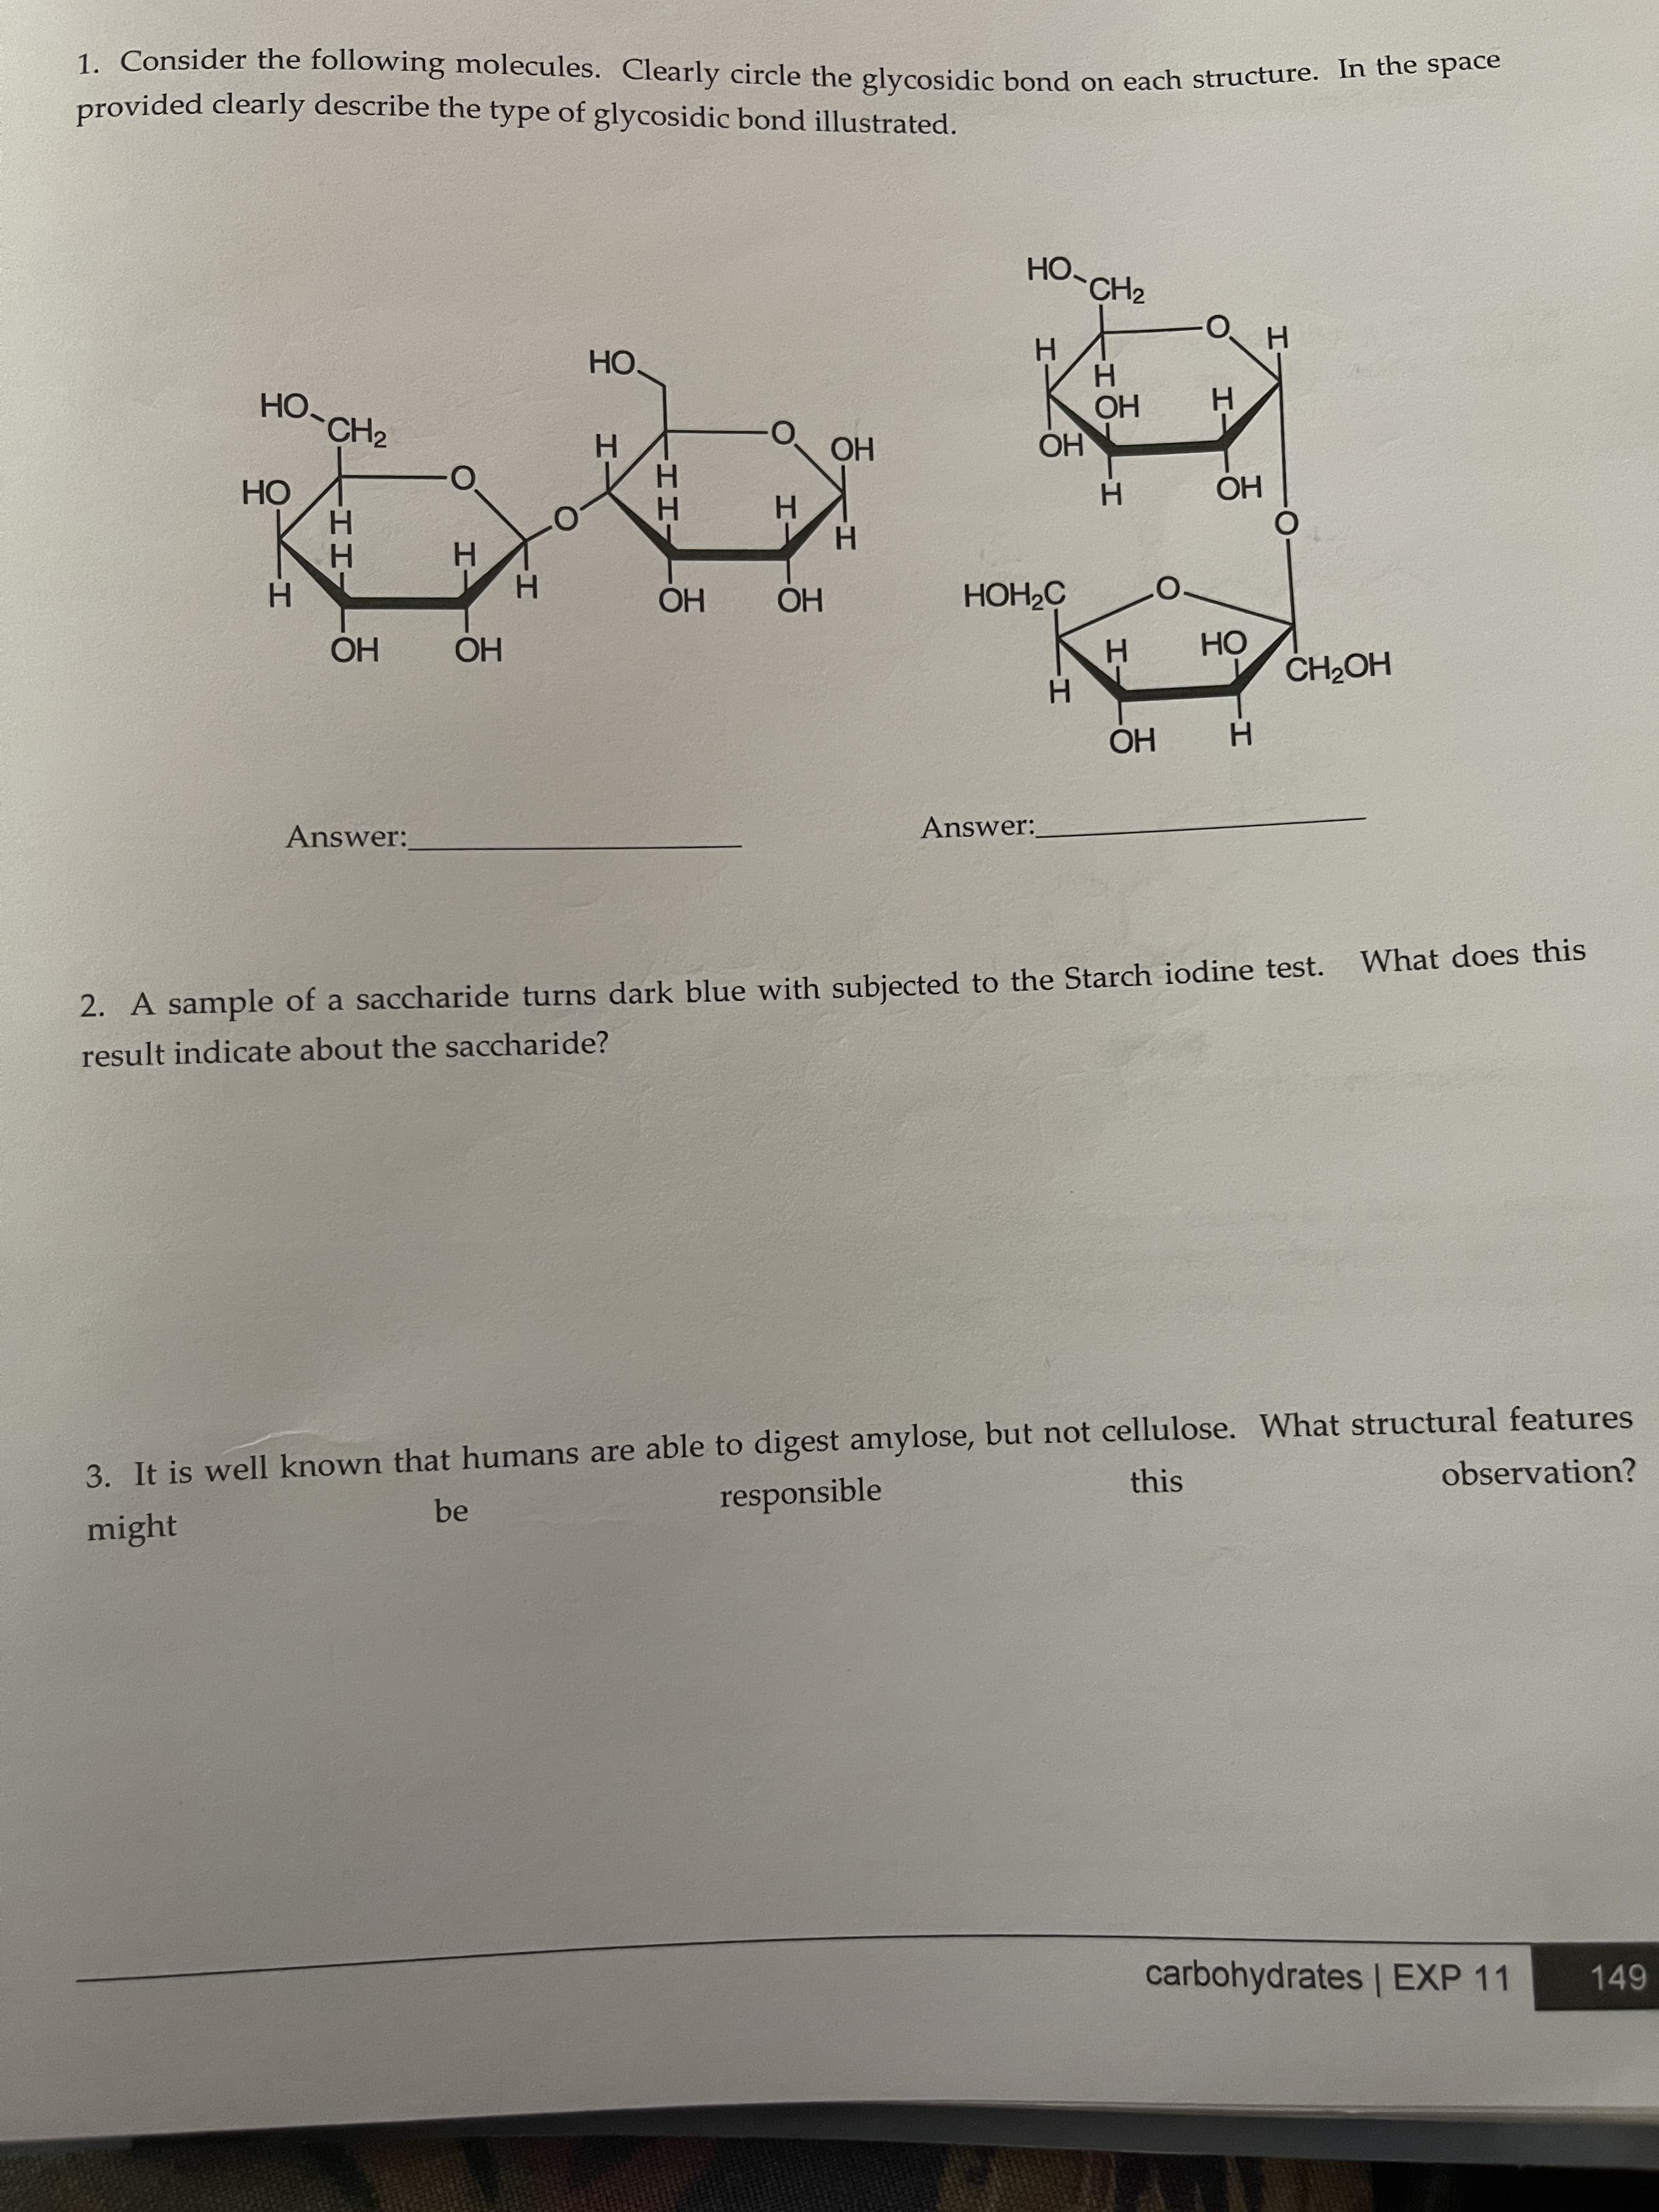 1. Consider the following molecules. Clearly circle the glycosidic bond on each structure. In the Spae
provided clearly describe the type of glycosidic bond illustrated.
HO-CH2
O.
H.
H.
OH
HO.
HO-CH2
OH
H.
H.
H.
OH
H.
OH
Но
H.
H.
H.
OH
OH
HOH2Ç
HO
OH
OH
CH2OH
HI
エー
エエー
